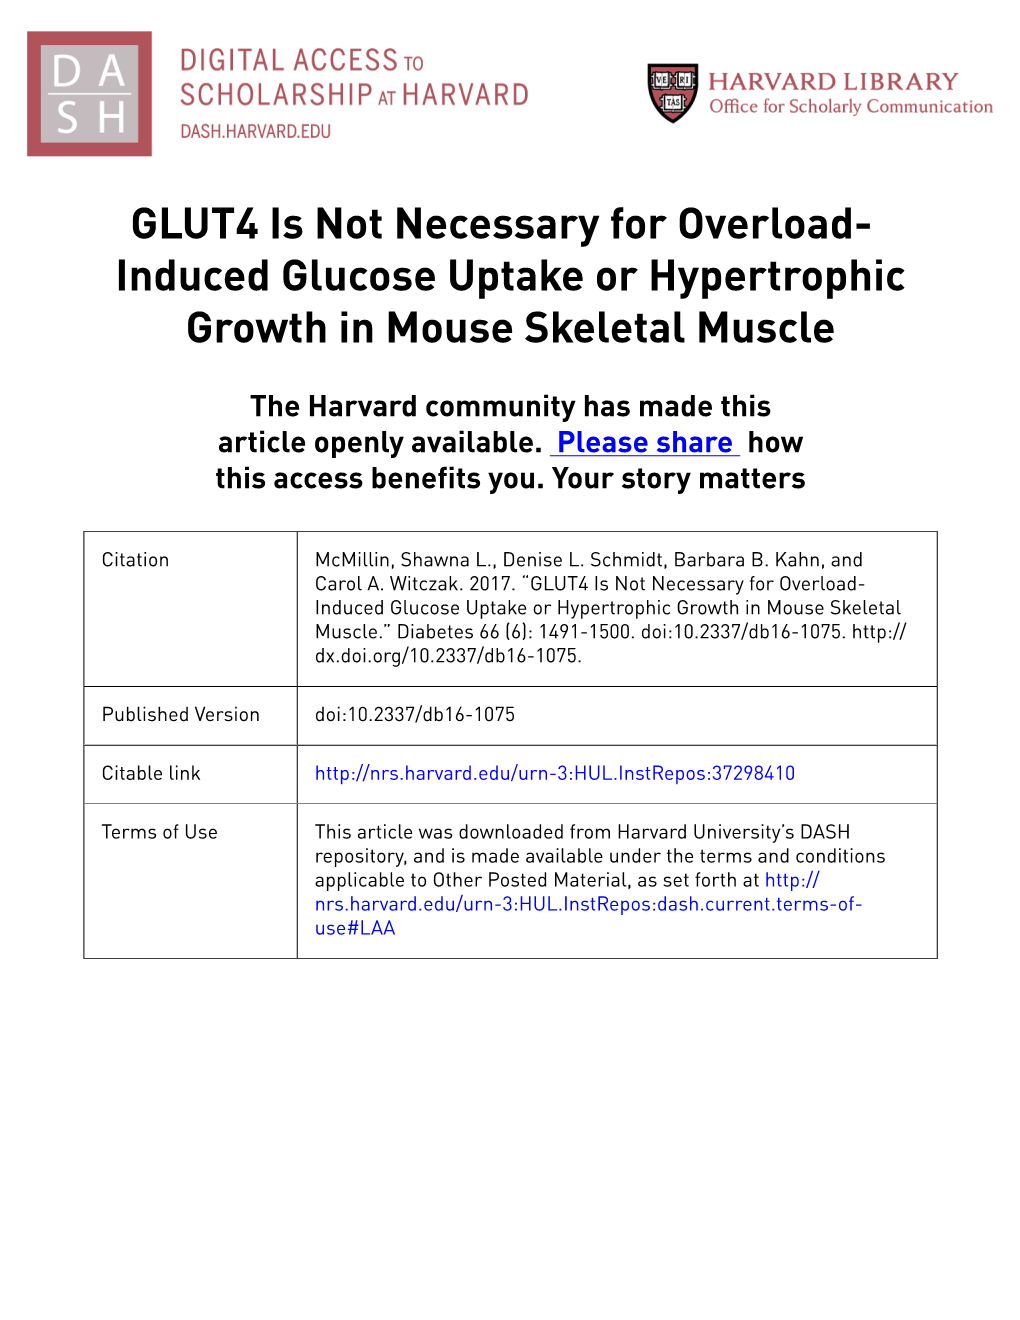 GLUT4 Is Not Necessary for Overload- Induced Glucose Uptake Or Hypertrophic Growth in Mouse Skeletal Muscle